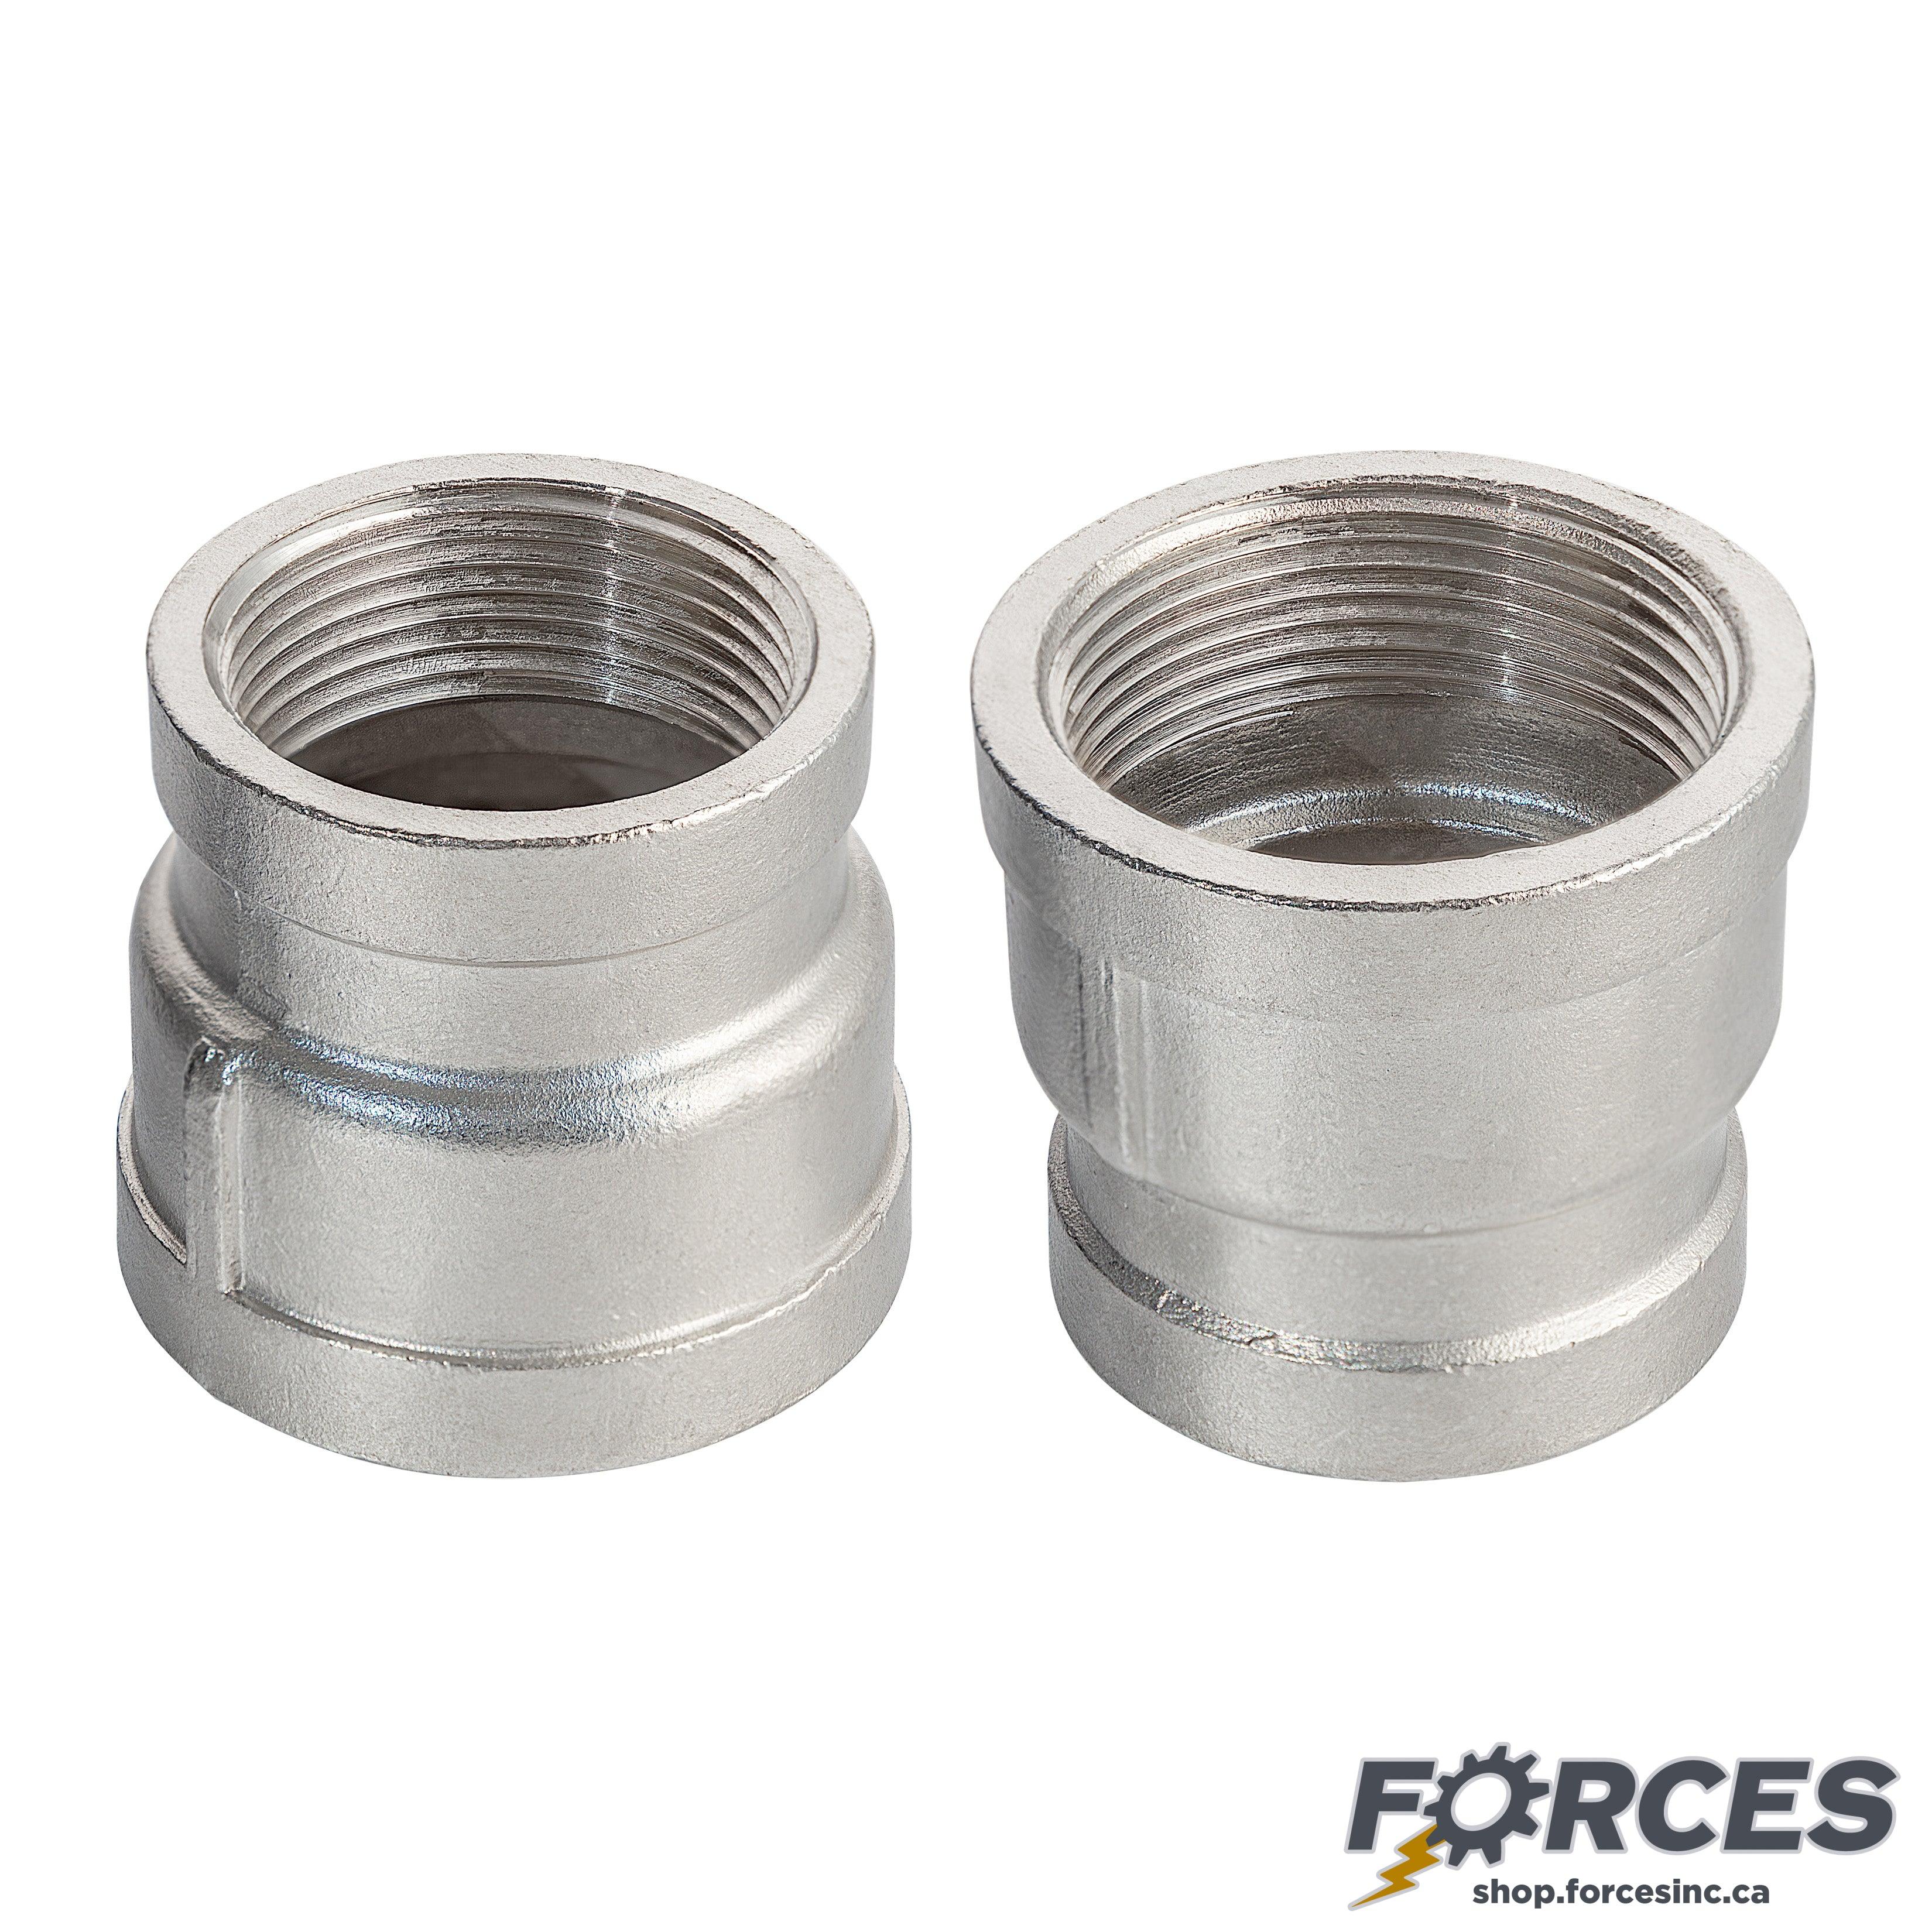 1/2" x 3/8" Coupling Reducer NPT #150 - Stainless Steel 316 - Forces Inc